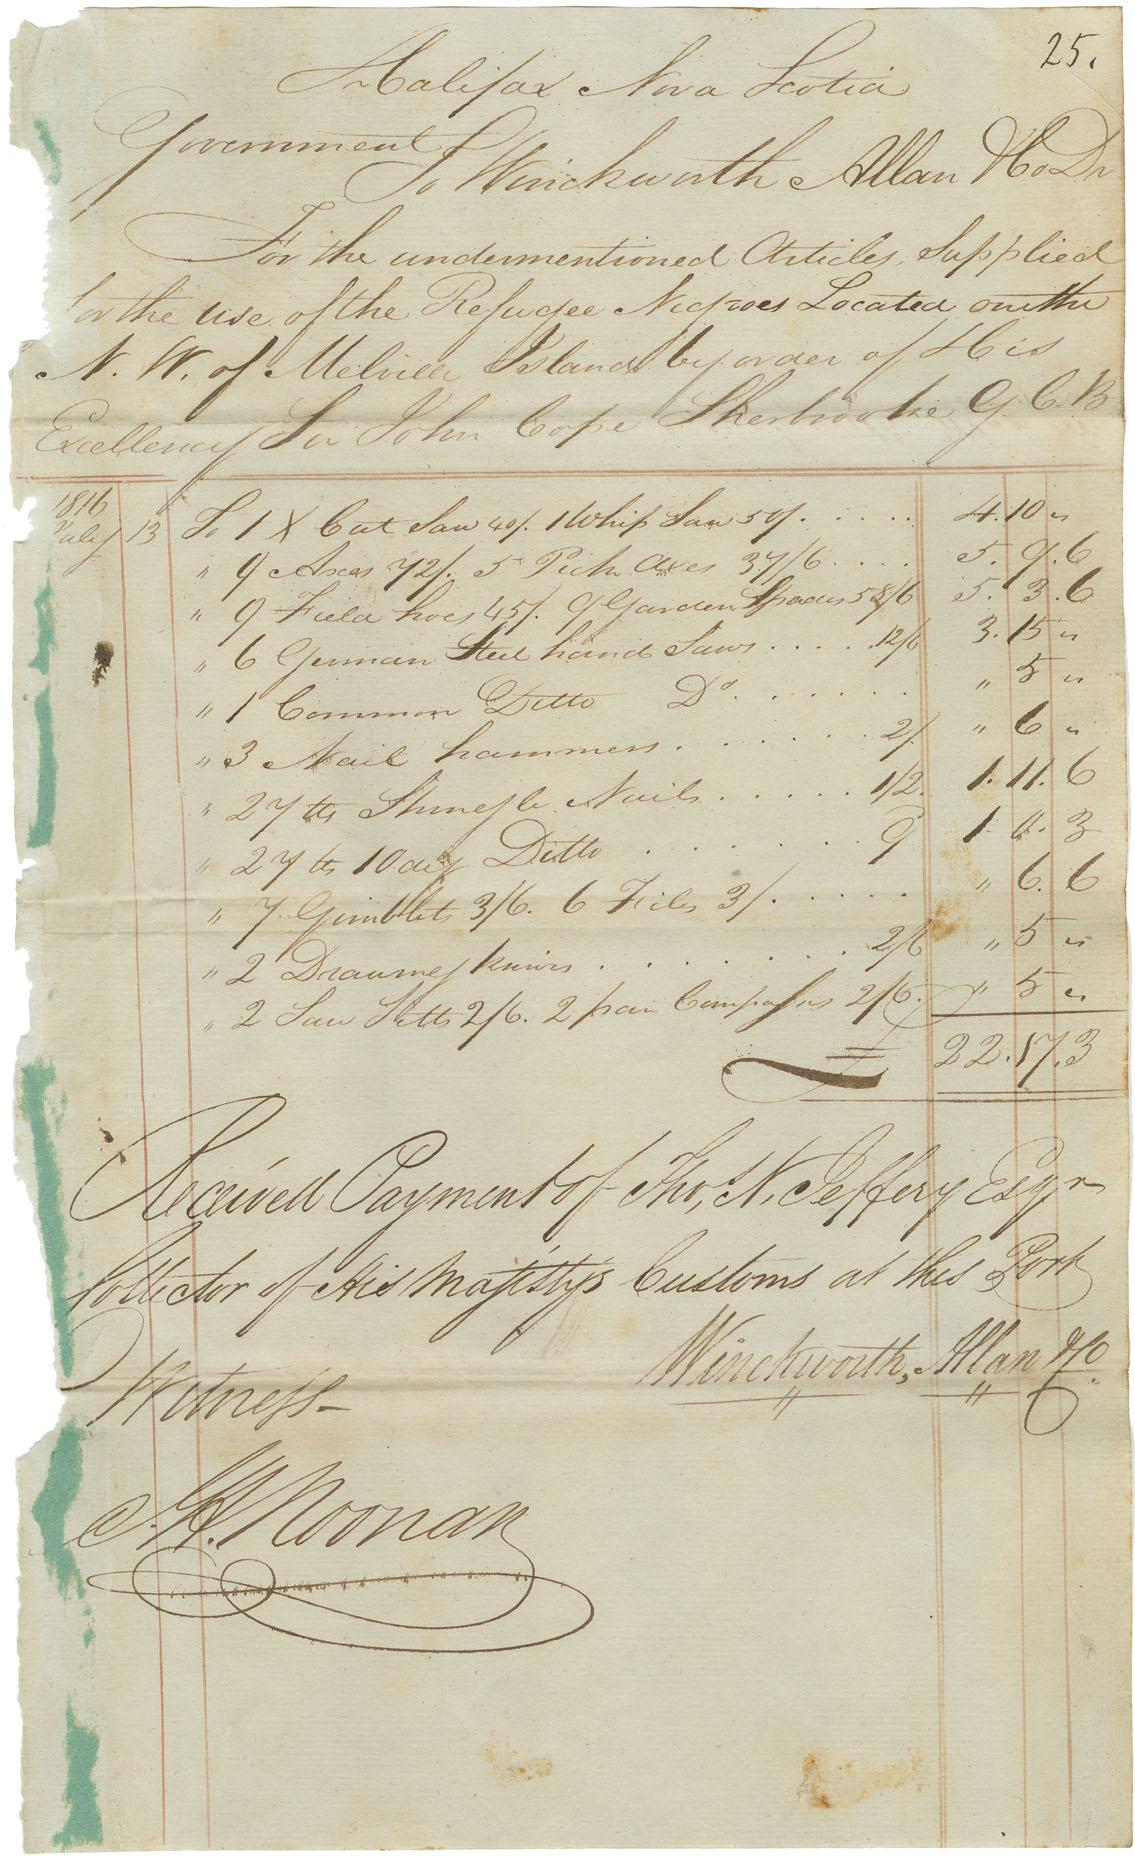 Accounts against Government for supplies for Black Refugees during the year 1816, with the following suppliers: John H. Noonan, Lewis DeMolitor, Robert Hodgers, John Skerry, Thomas N. Jeffery, Robert Leslie, Edward Randall, William Conroy, James Scott, Theophilus Chamberlain, Richard Munday, Wallace and Russell, Winkworth Allan, George Eaton, Samuel Head, Alexander Wallace, David Howe, Hartshorne, Boggs and Company, J & D Starr and Thomas Johnson